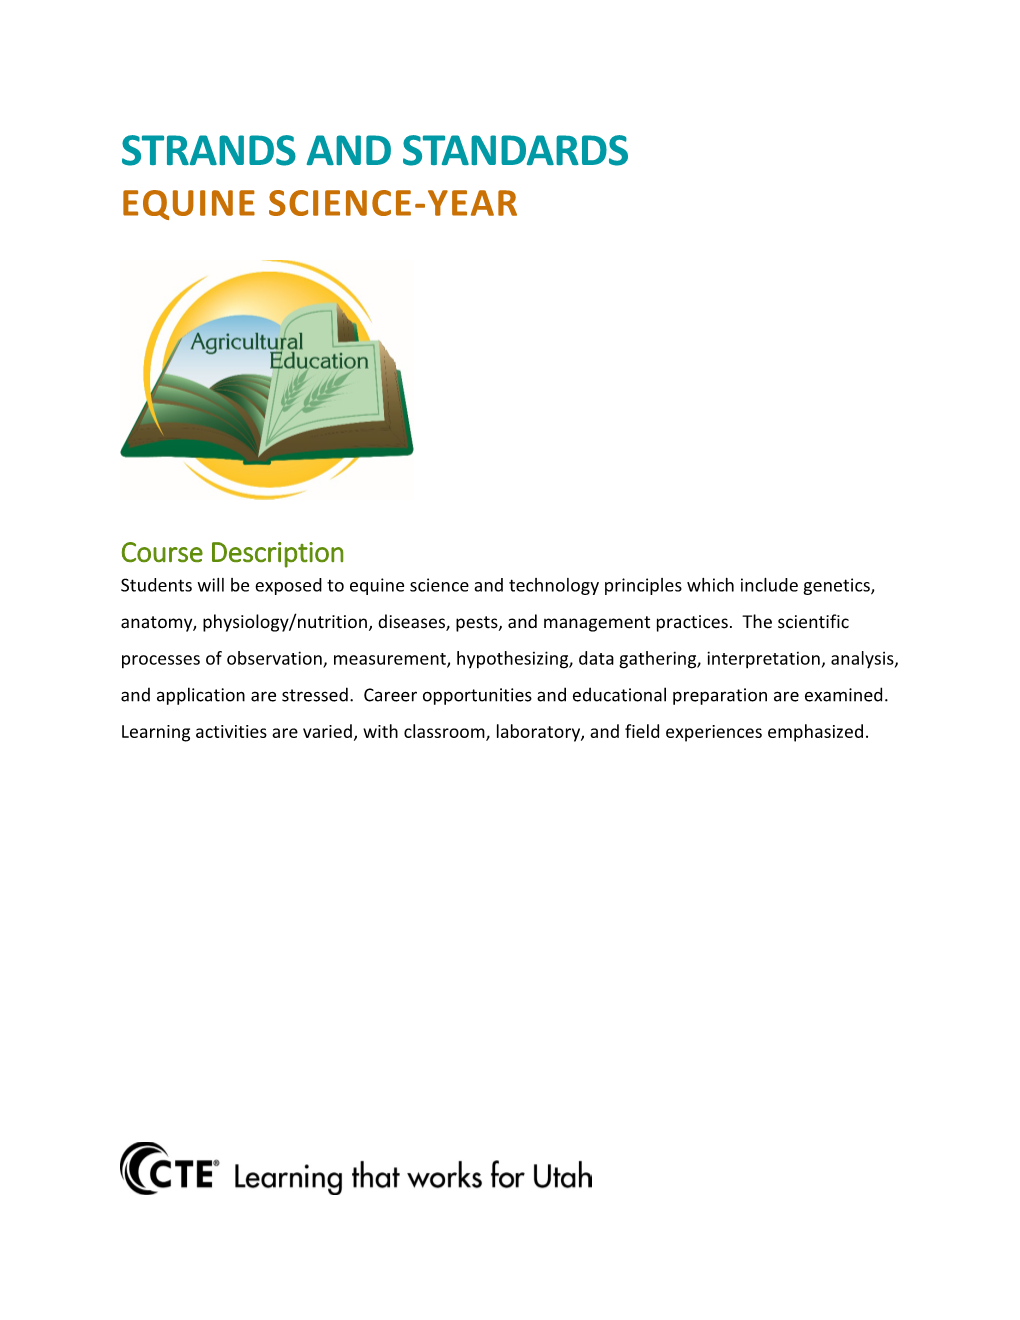 Equine Science-Year